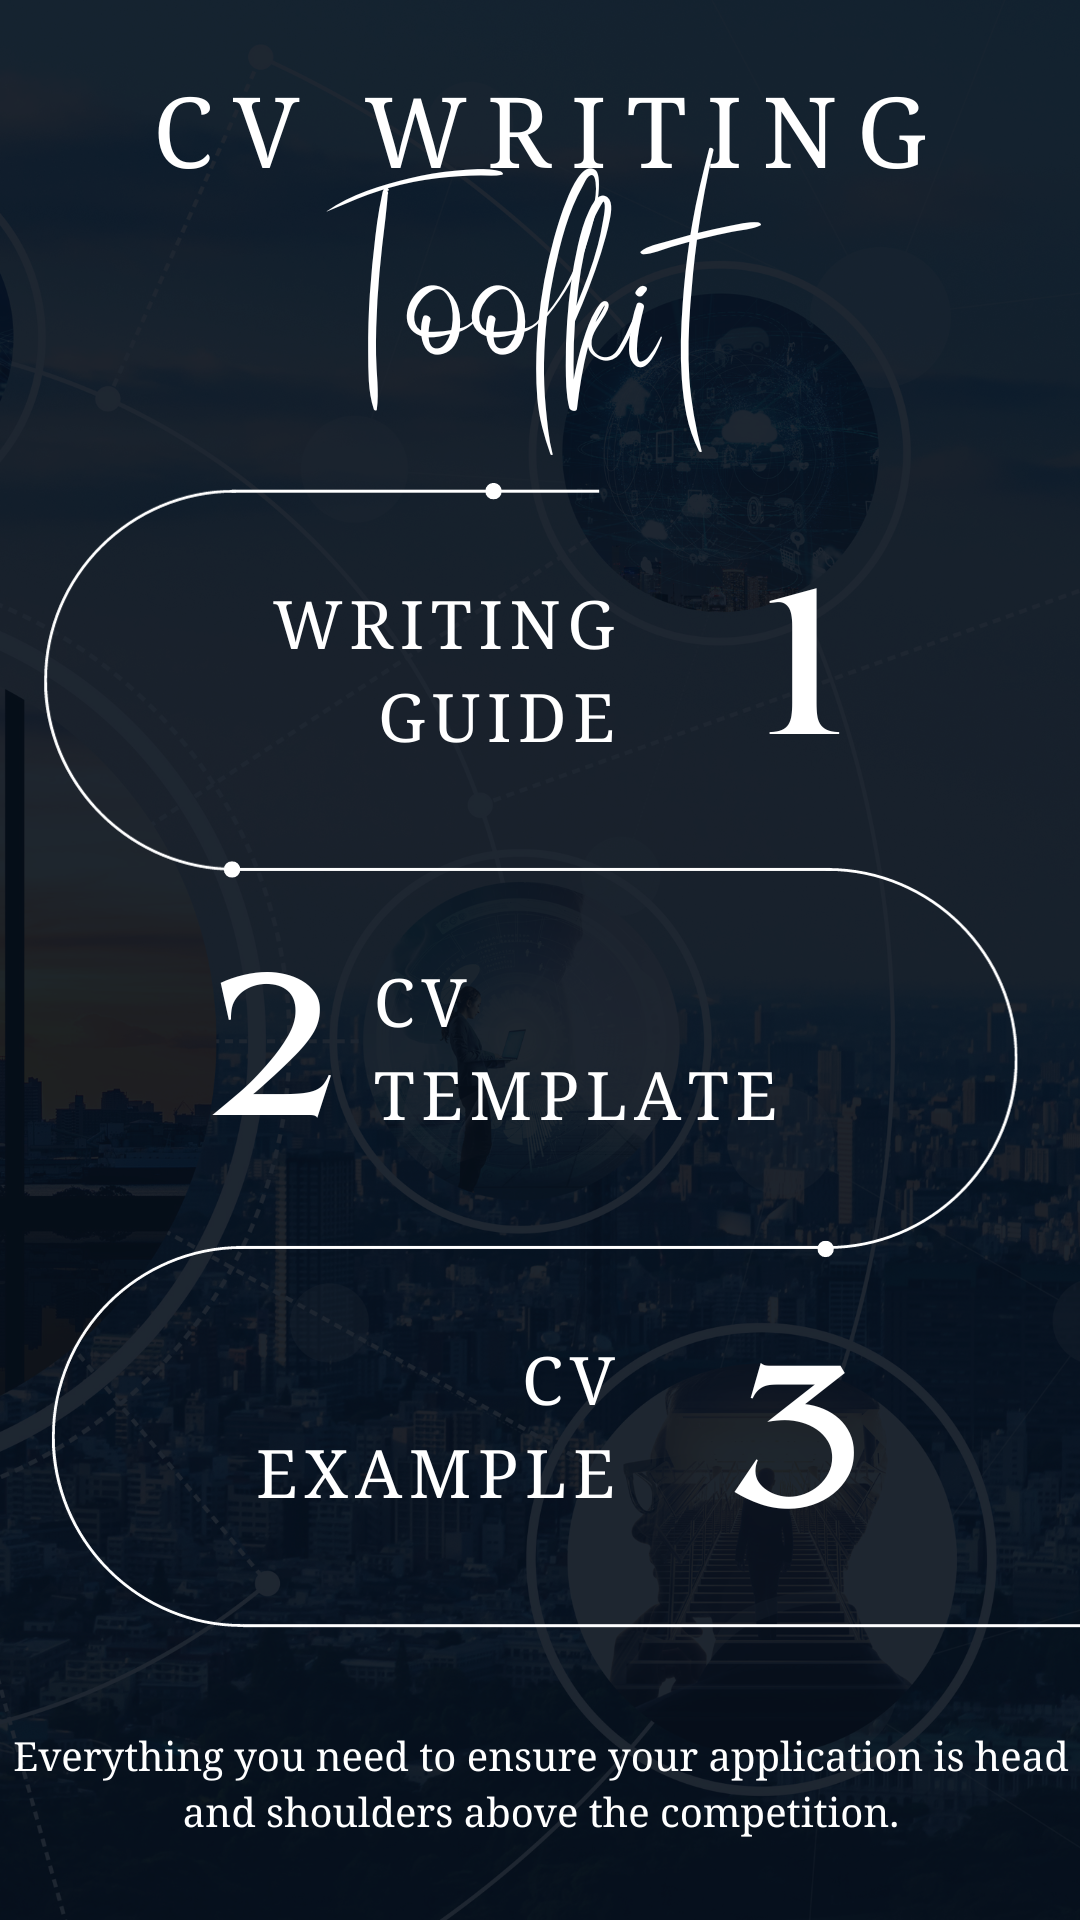 Risk Manager CV Writing Toolkit